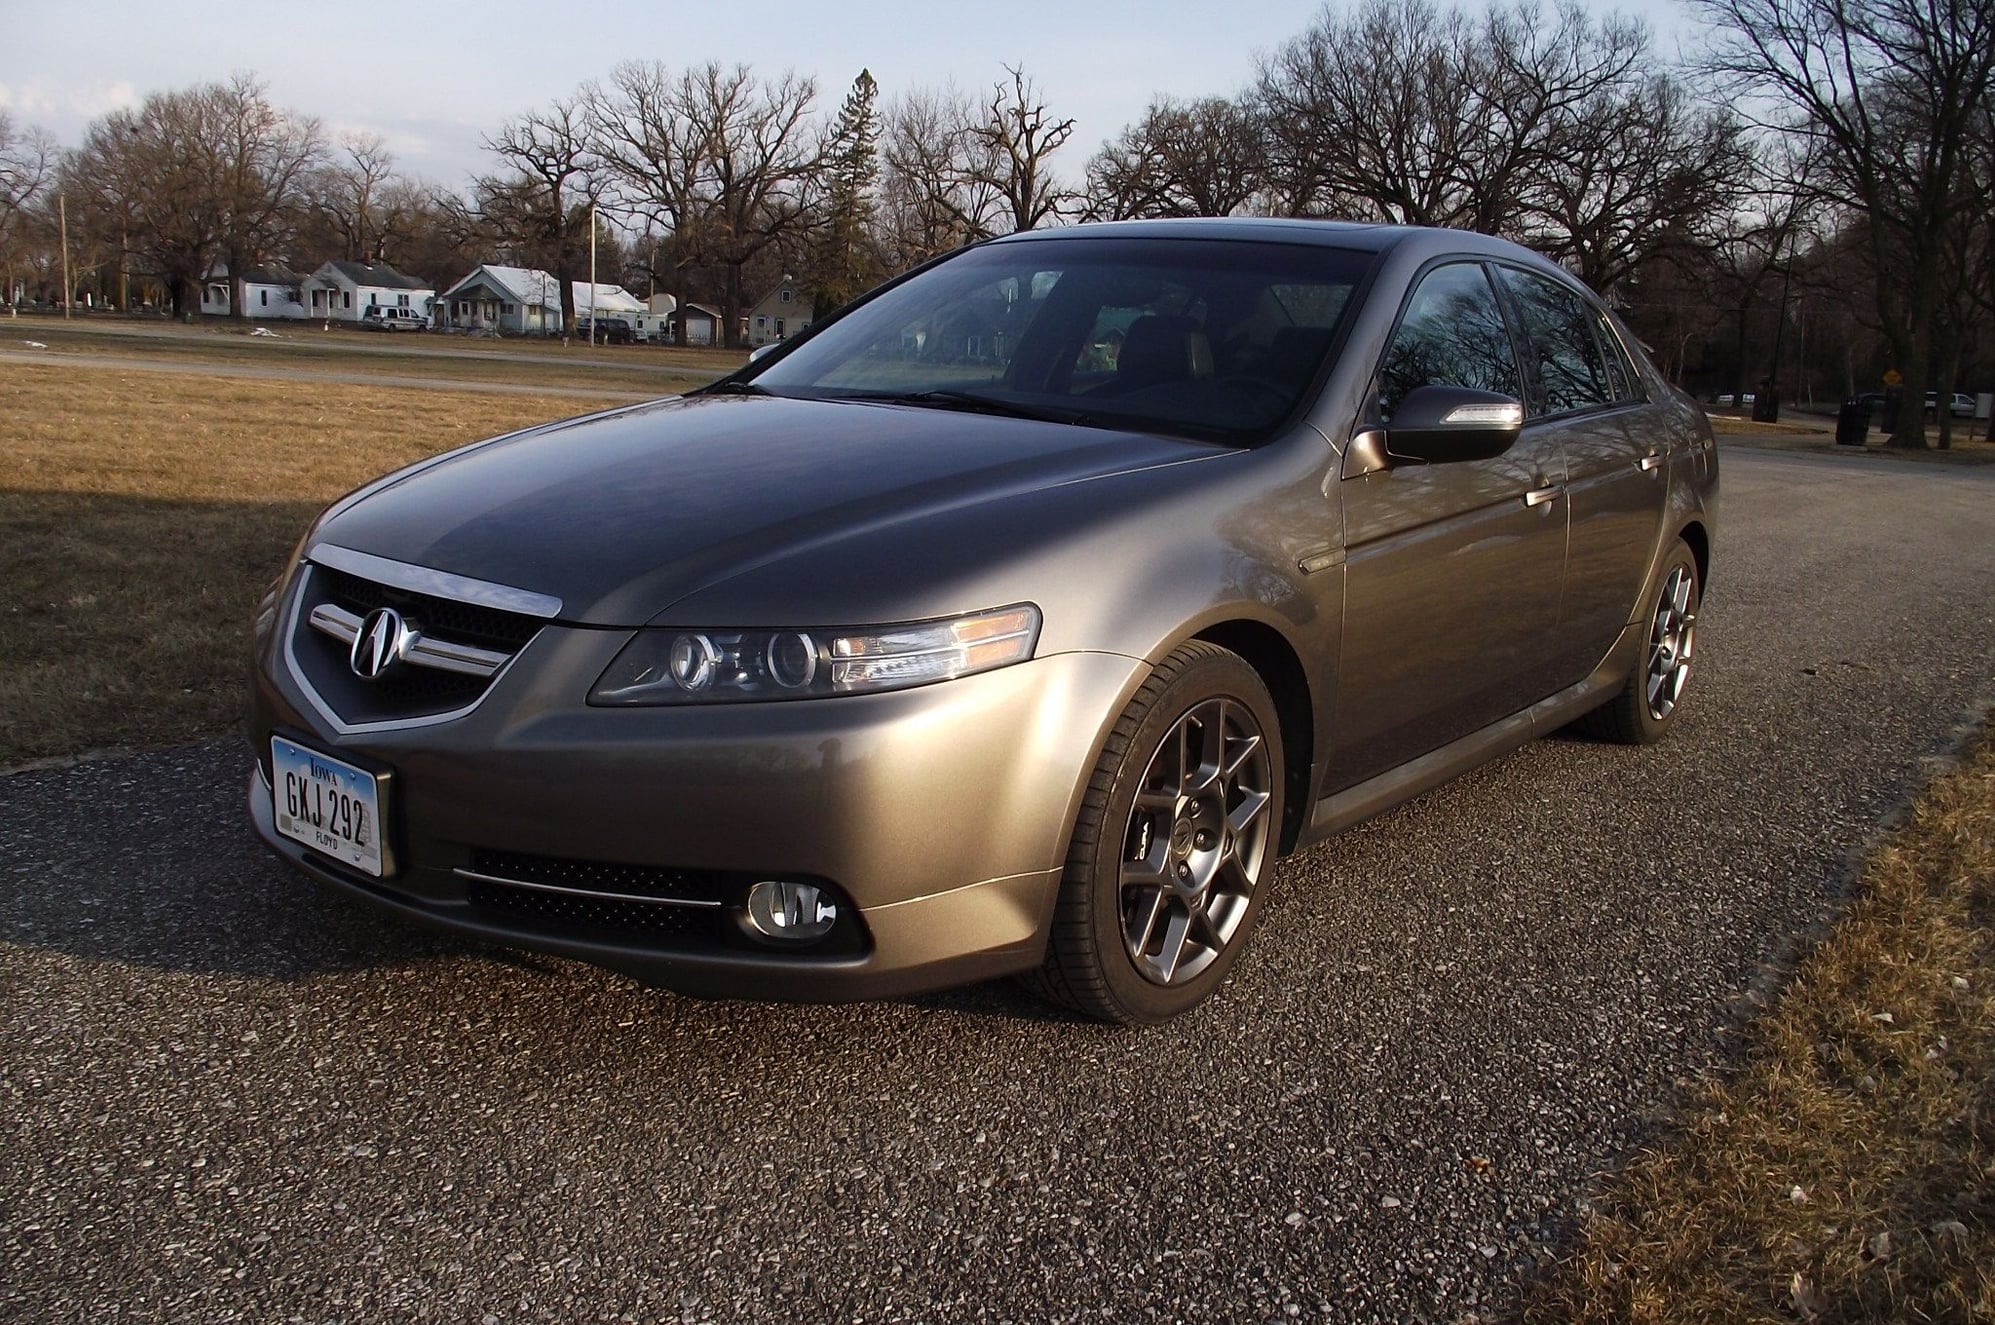 2008 Acura TL - SOLD: 2008 Acura TL Type S   83,000 miles! A/T - Used - VIN 19UUA76538A004416 - 83,000 Miles - 6 cyl - 2WD - Automatic - Sedan - Other - Charles City, IA 50616, United States